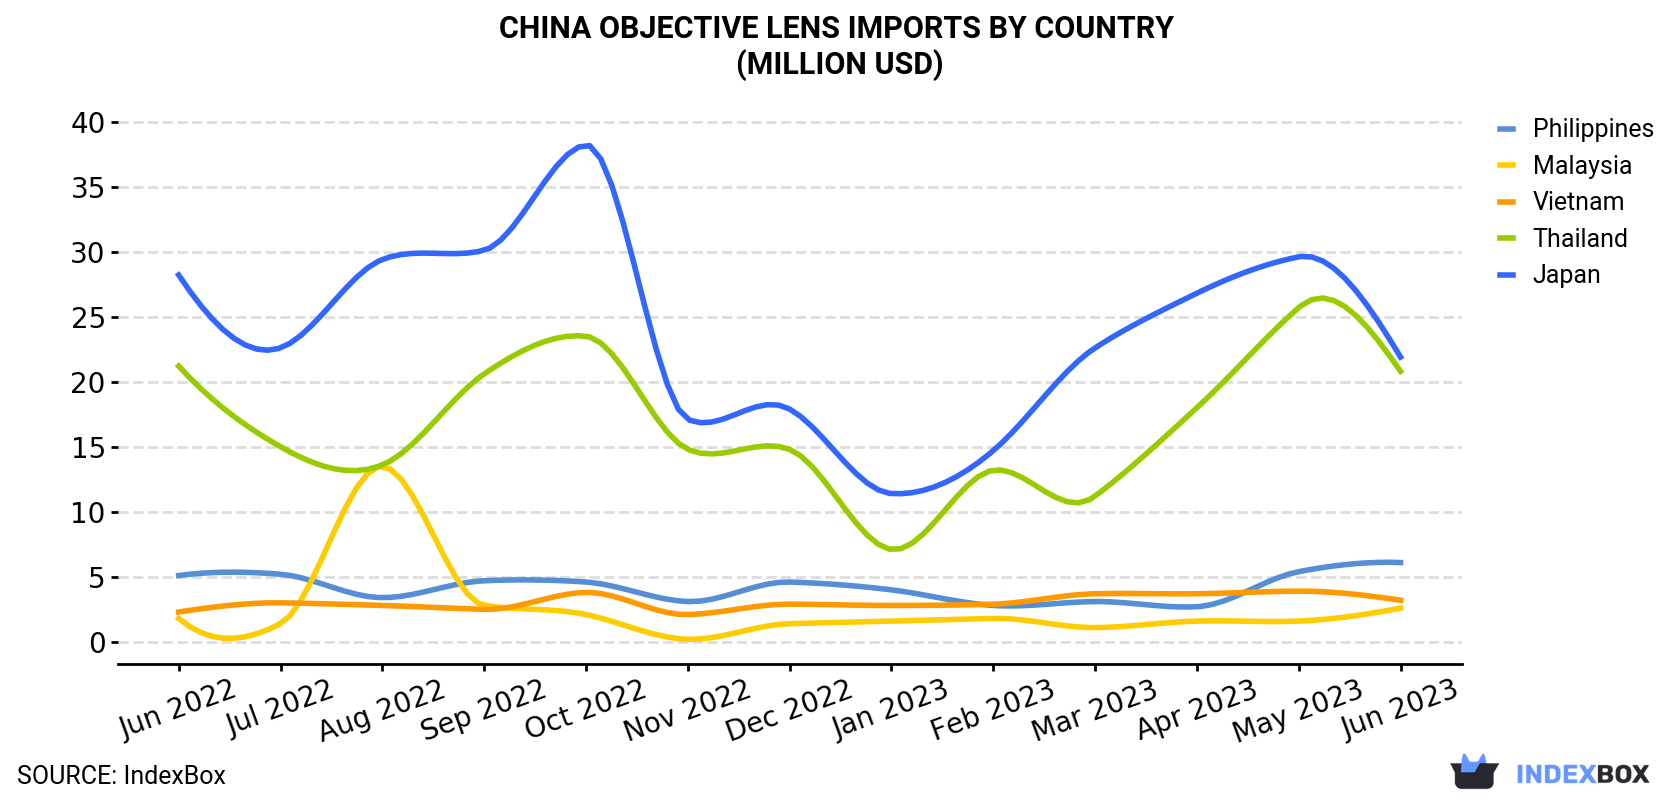 China's Imports of Objective Lenses Dive to $73M in June 2023 - News ...